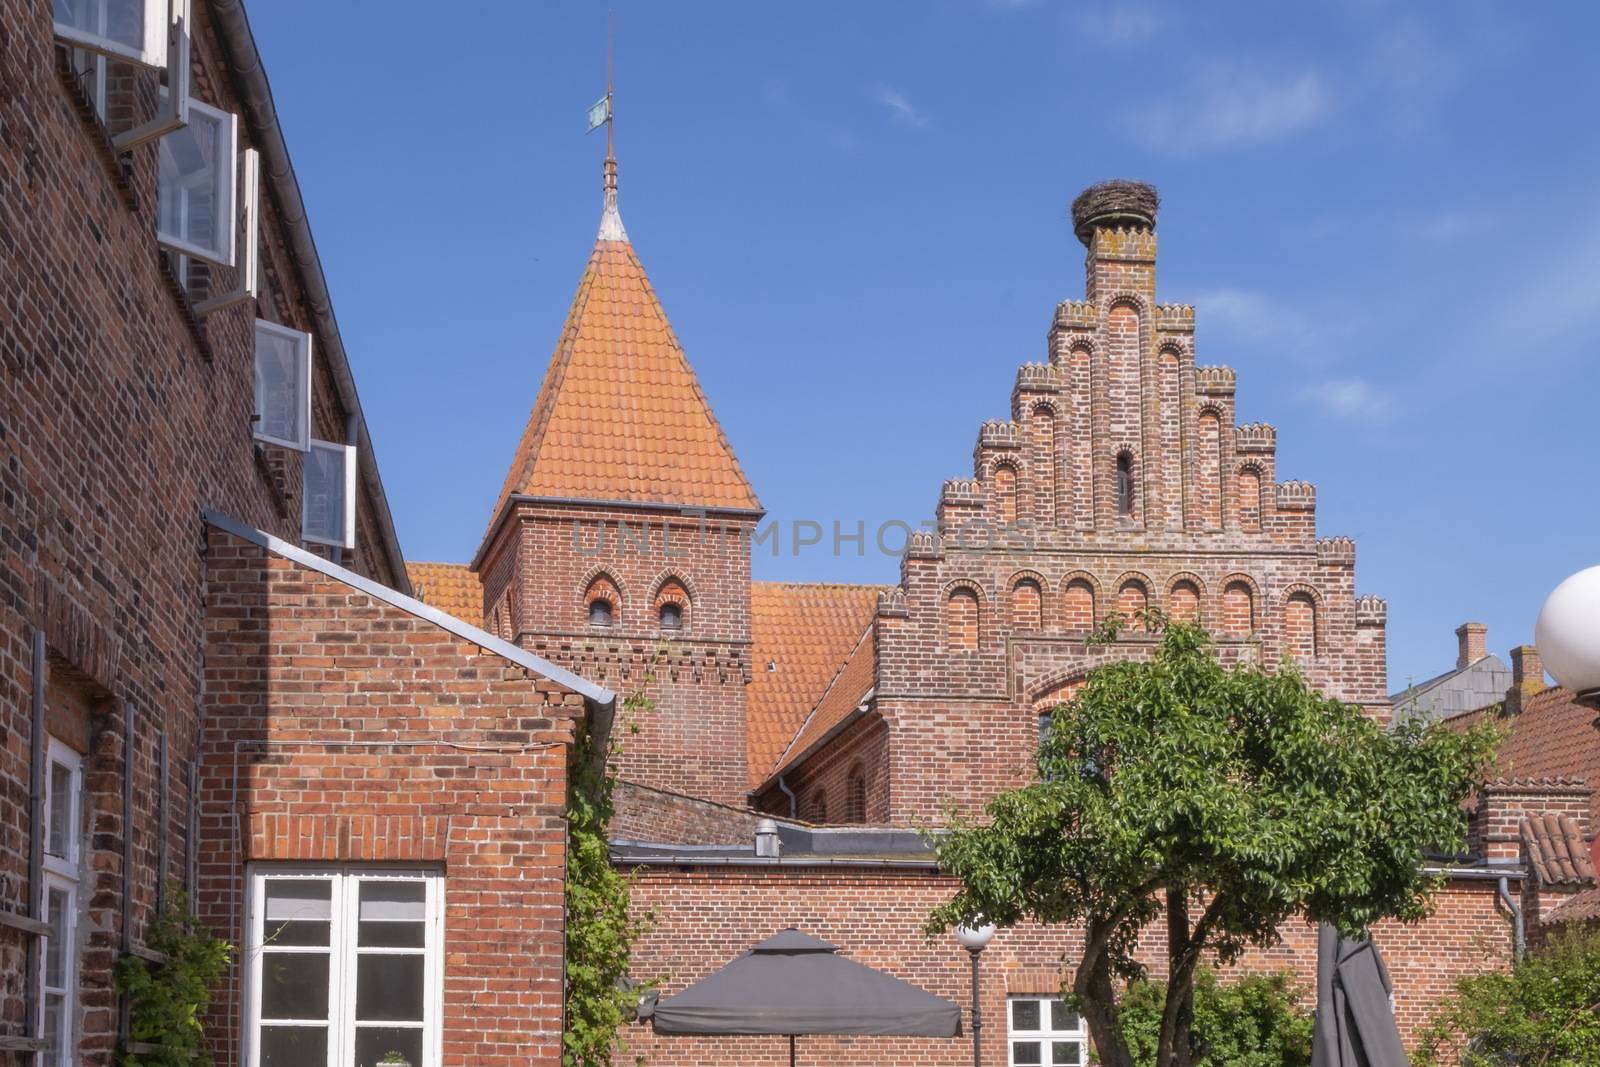 Houses in medieval Ribe town by day, Denmark